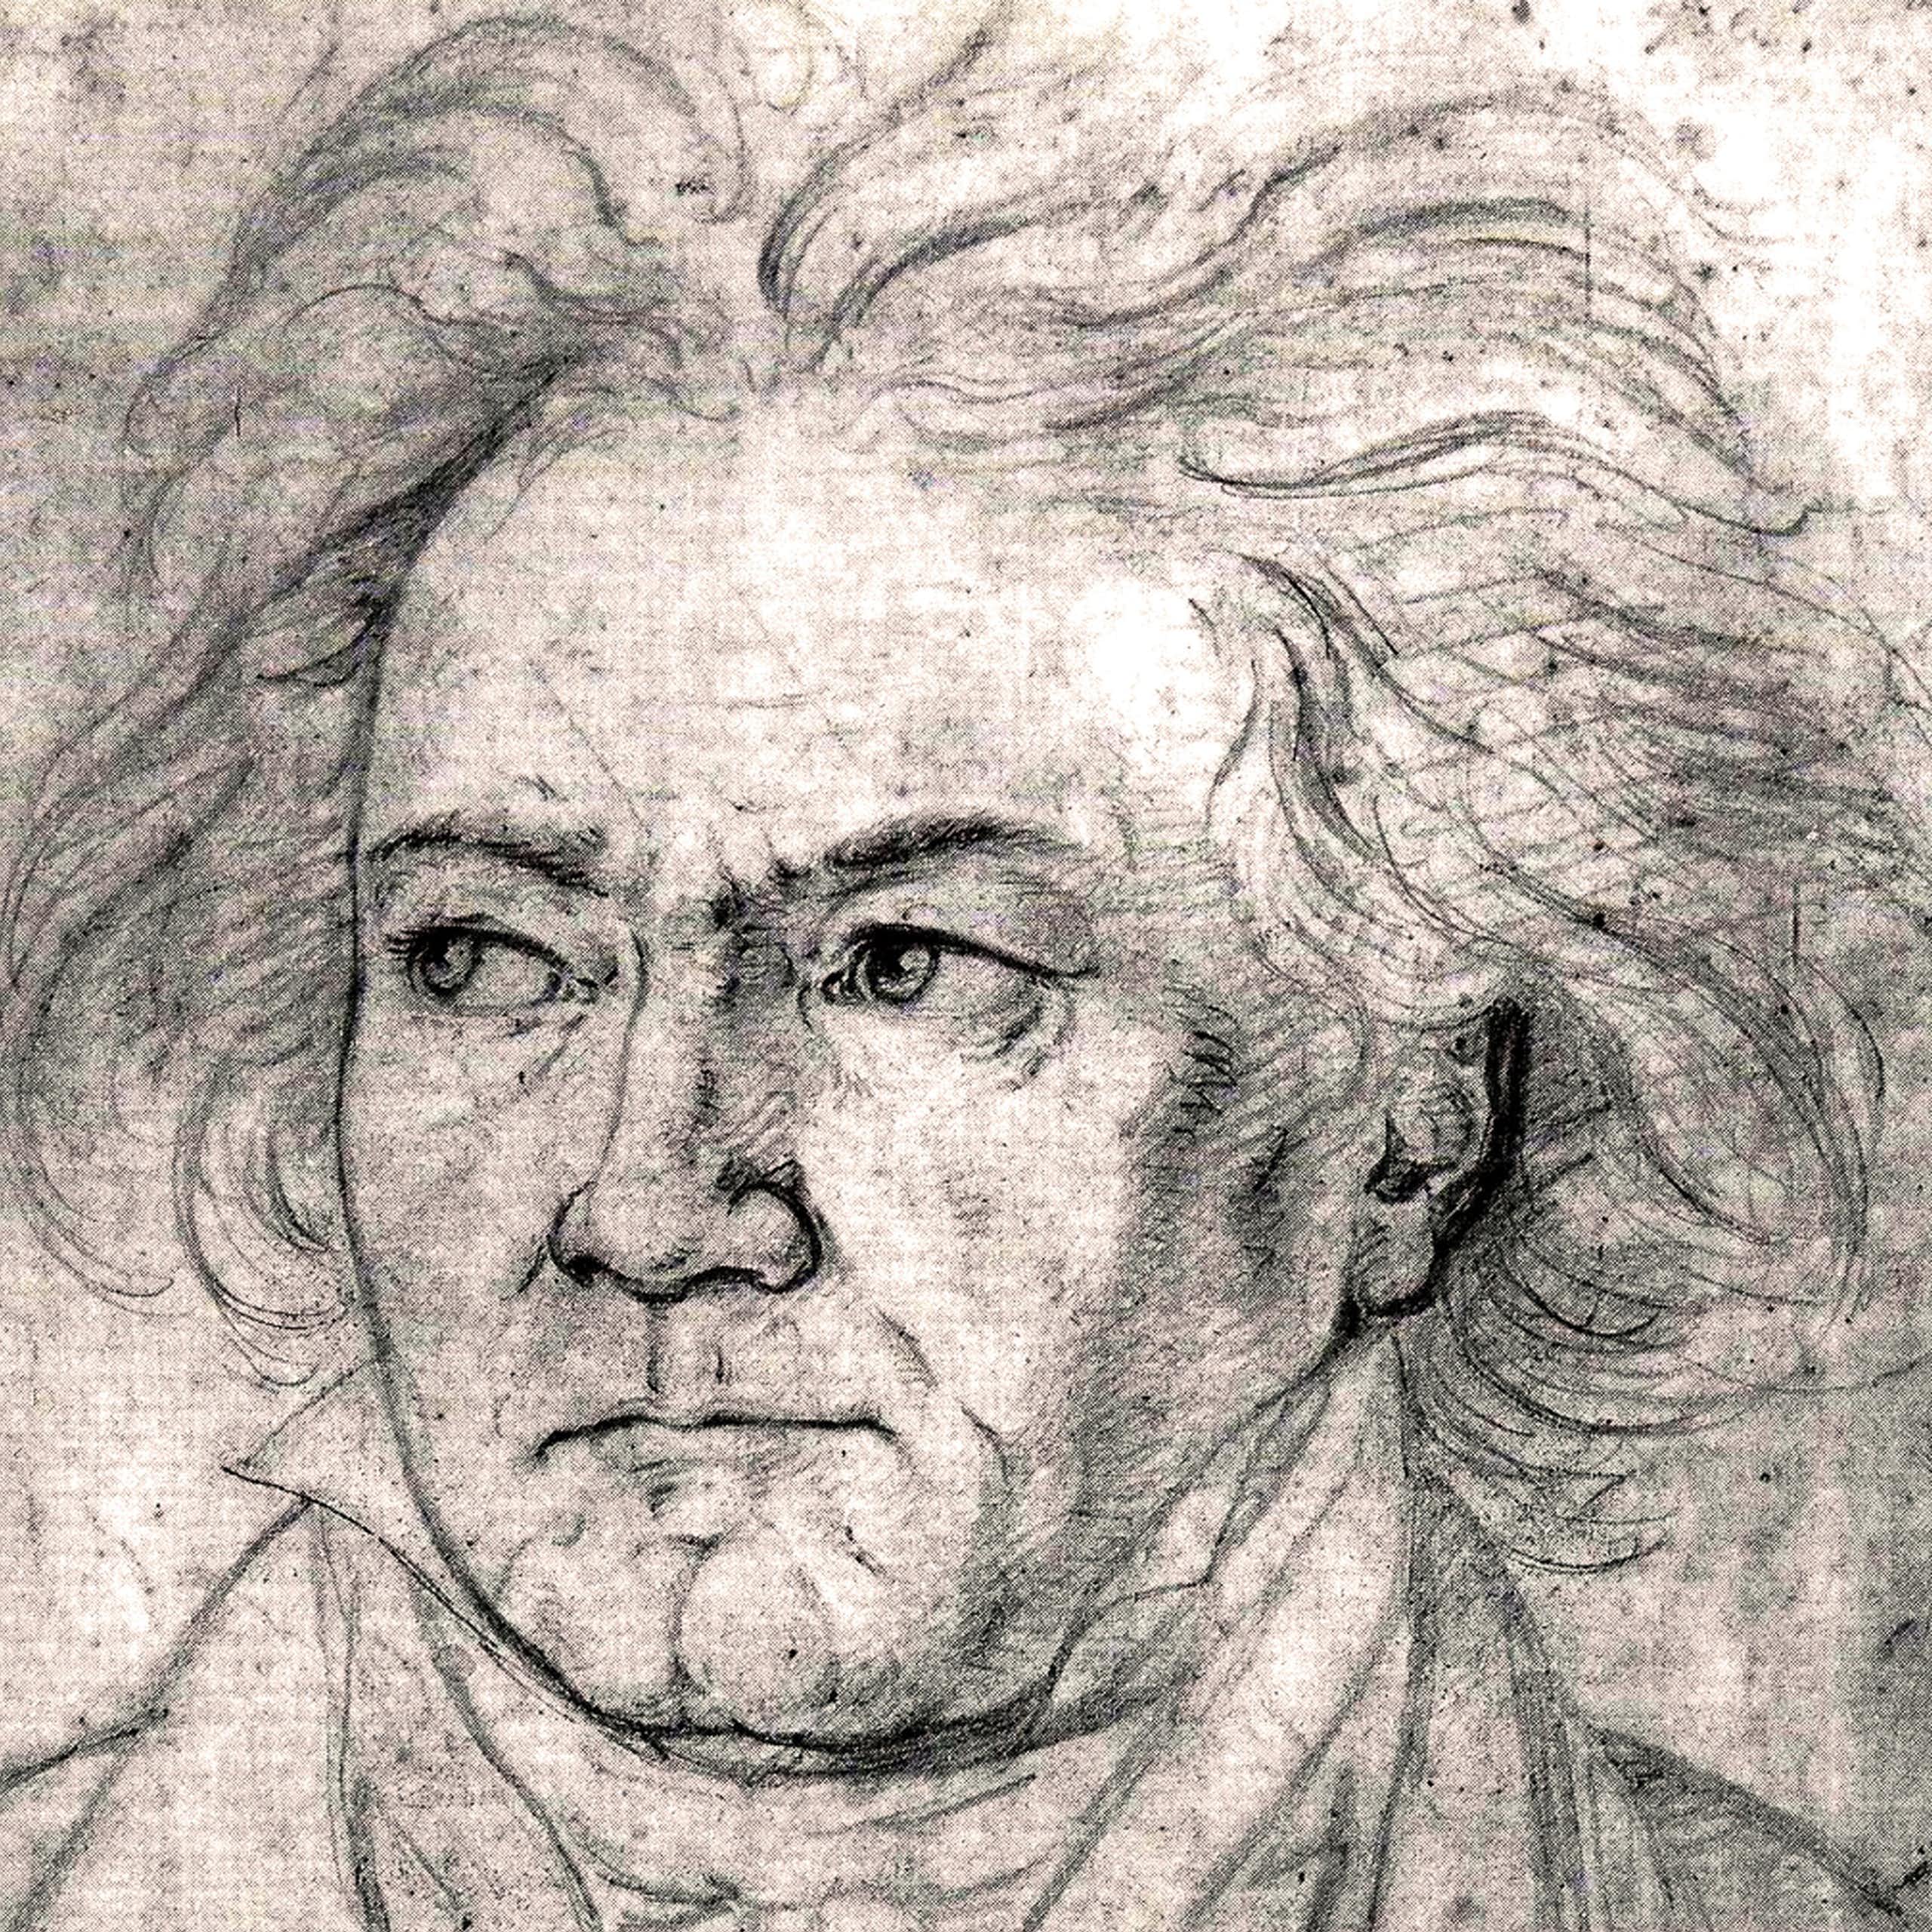 A painting of a white man with long hair looking into the distance.